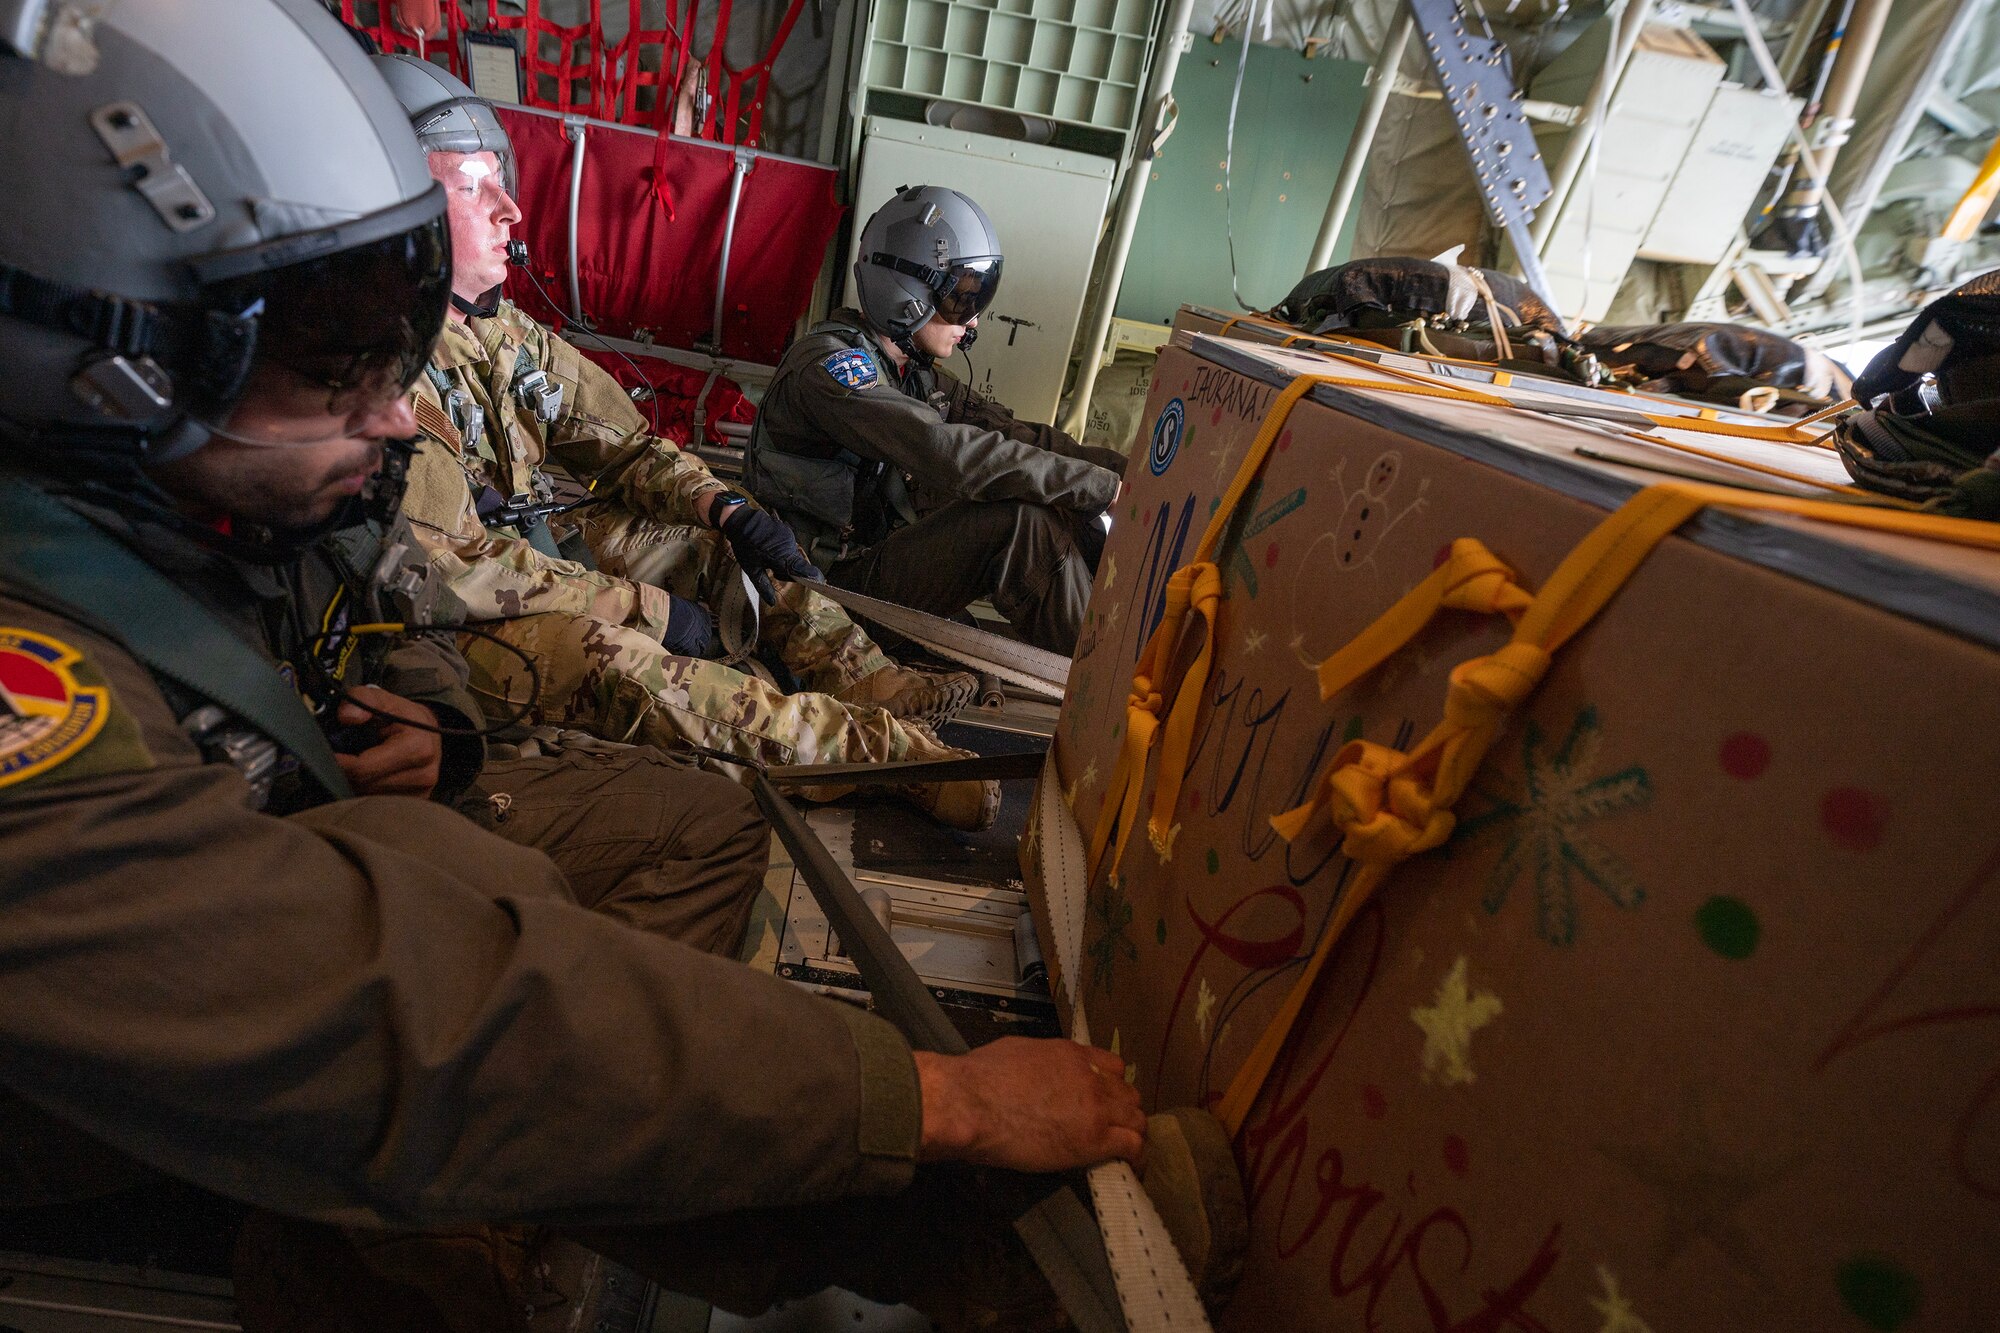 Airmen sitting in the cargo bay of a C-130 prepare to push bundles out of the aircraft